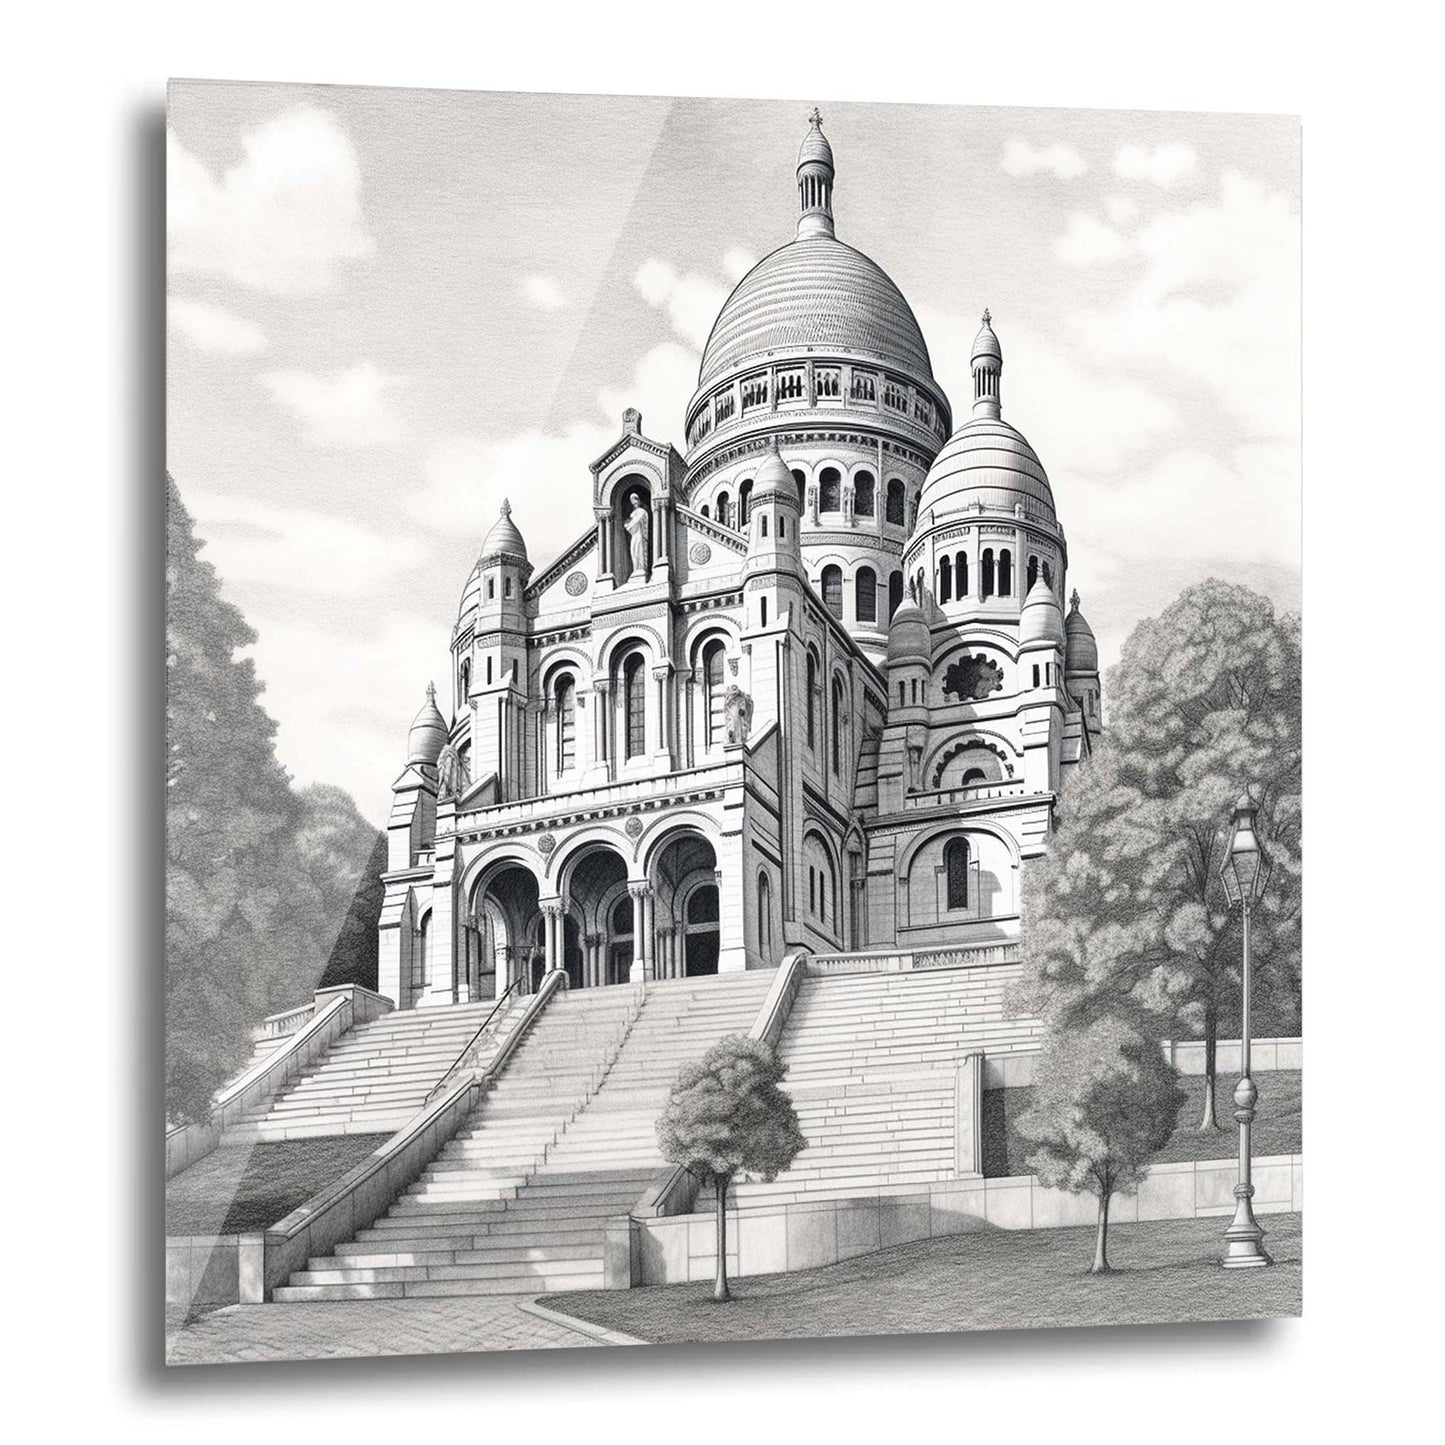 Paris Sacre Coeur - mural in the style of a drawing